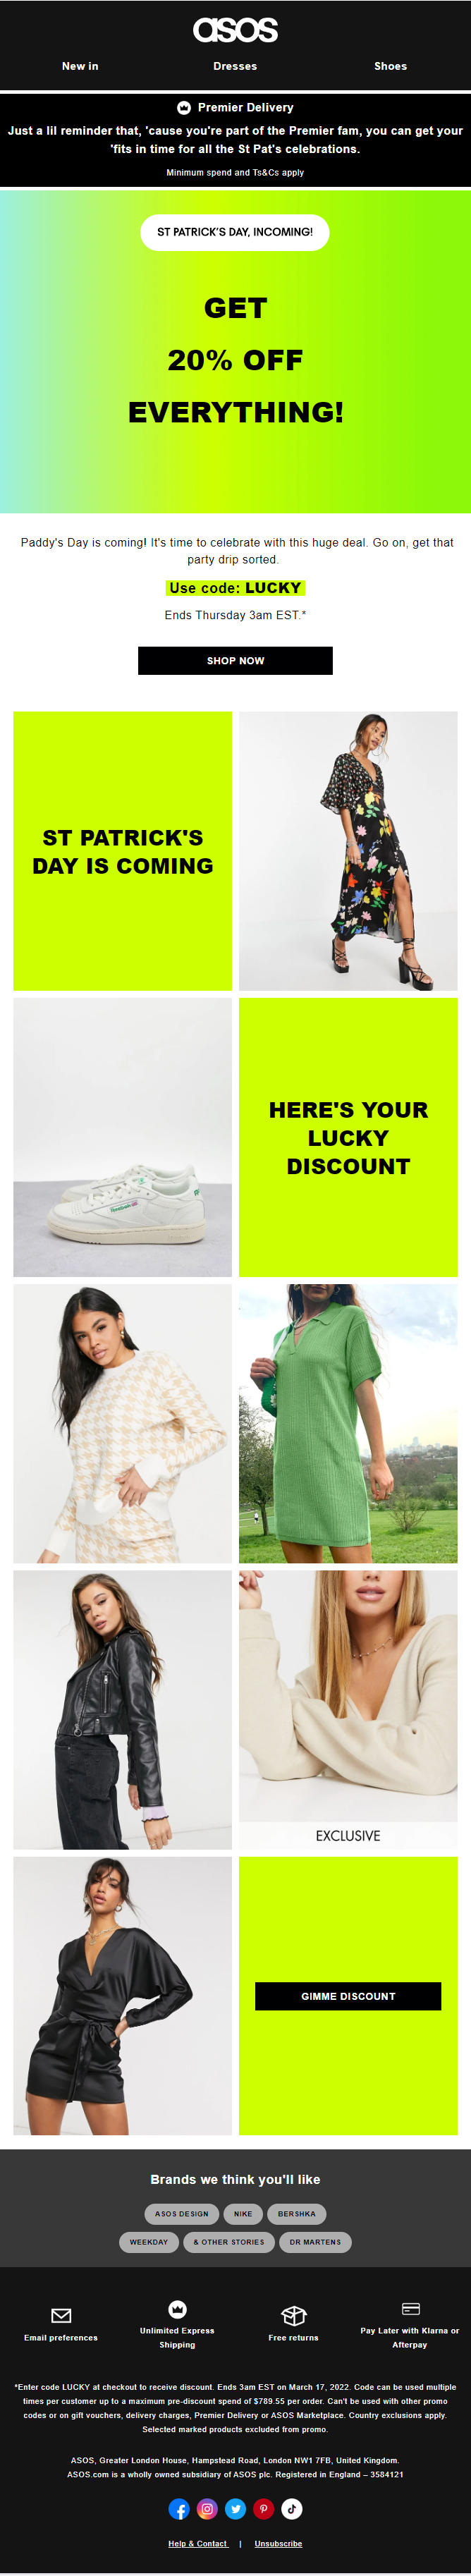 Asos- St Patrick’s Day email